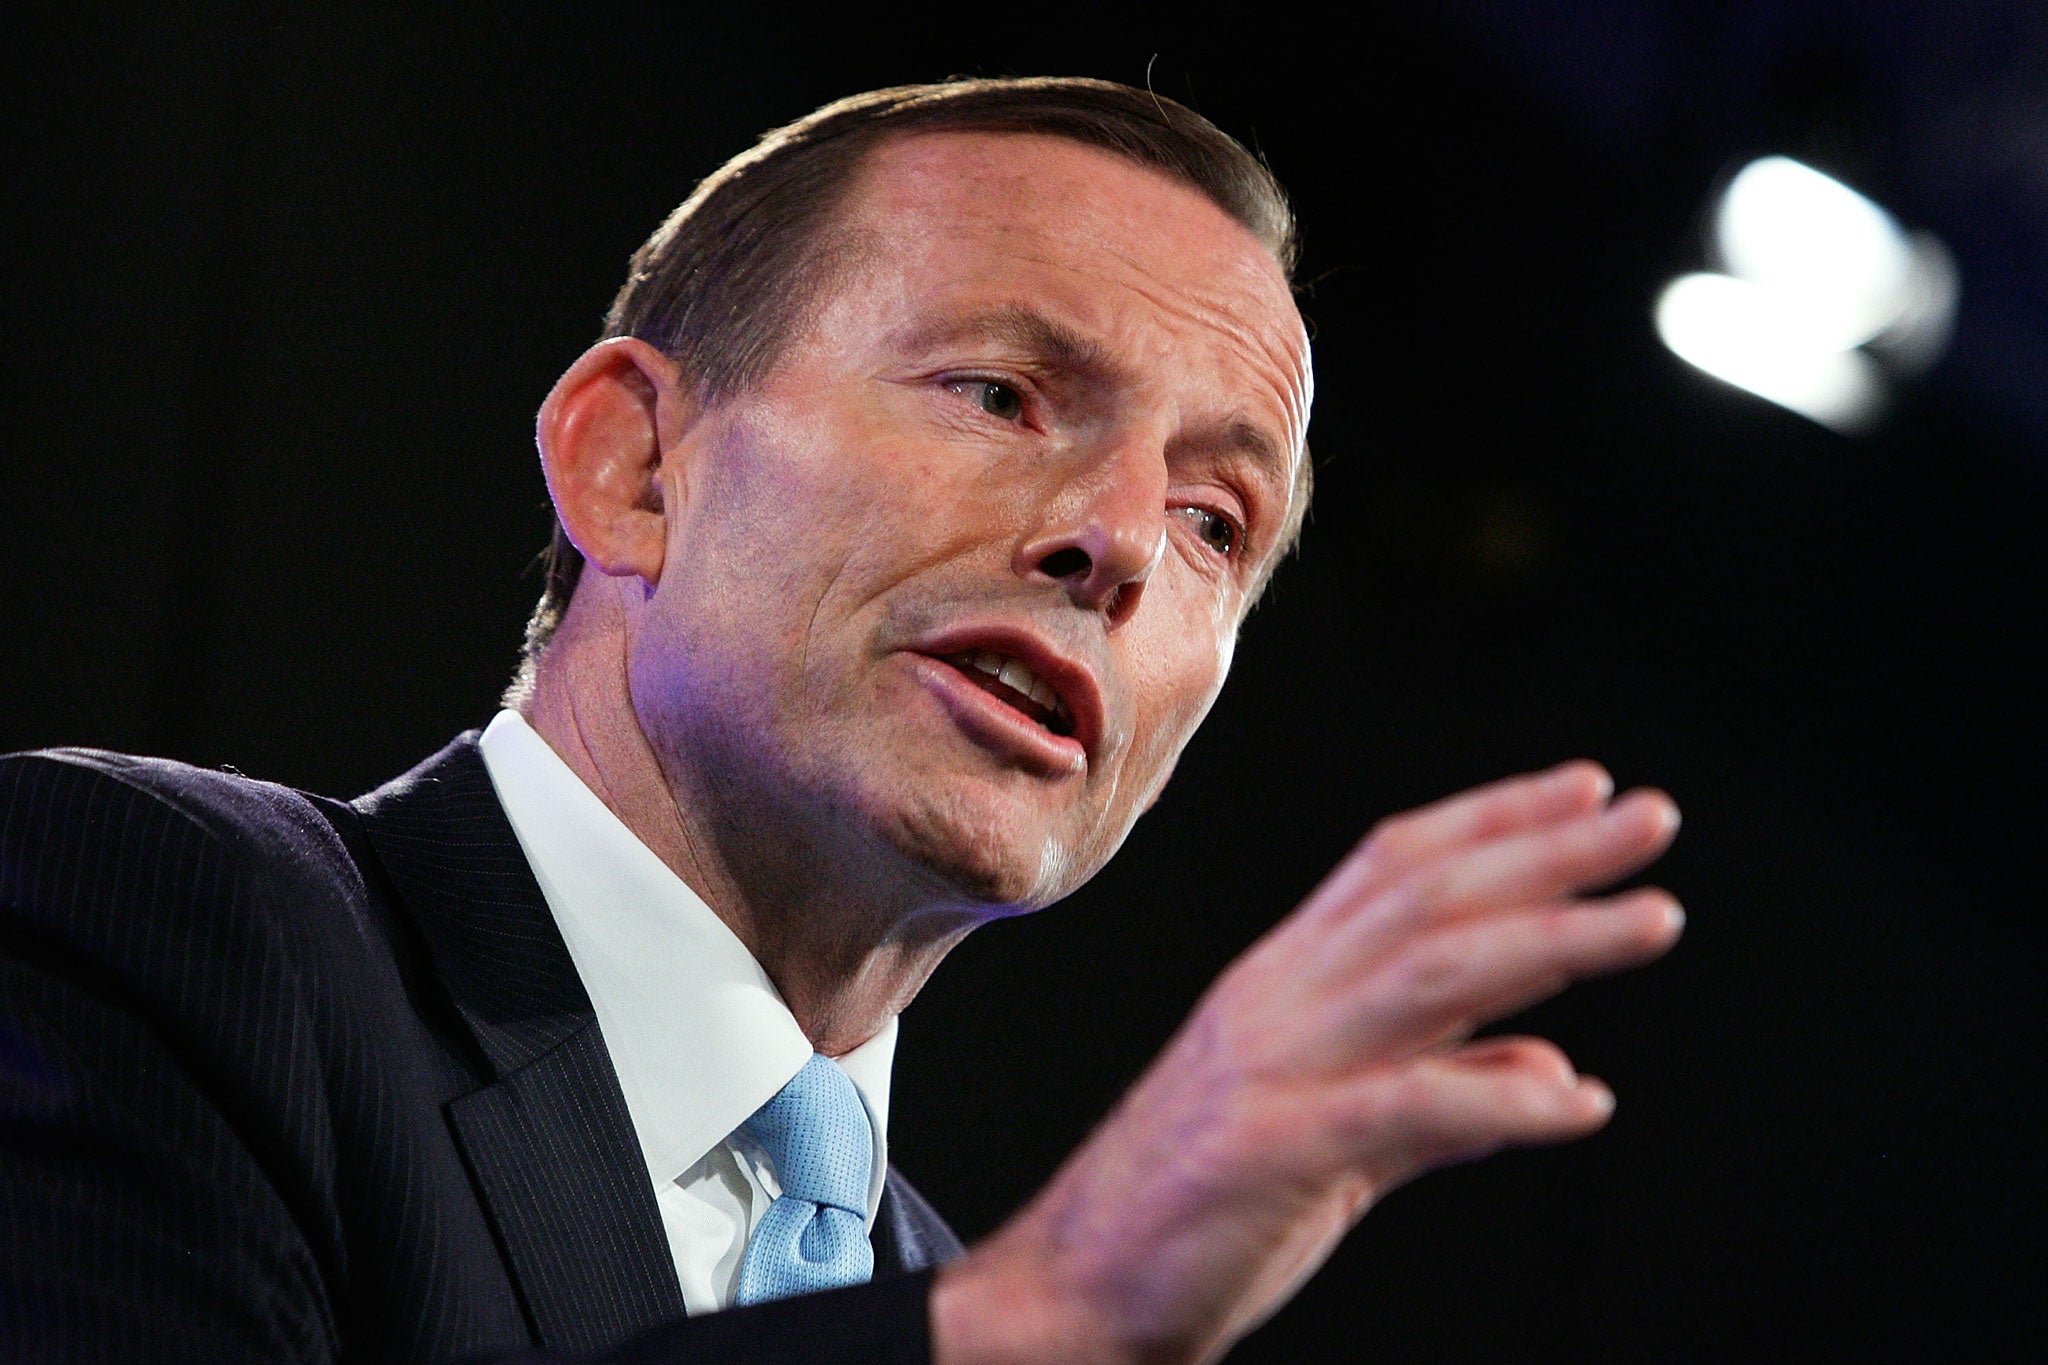 Tony Abbott's claims that Australia's 'stop the boats' policy saves lives has been dismissed by migrant charities